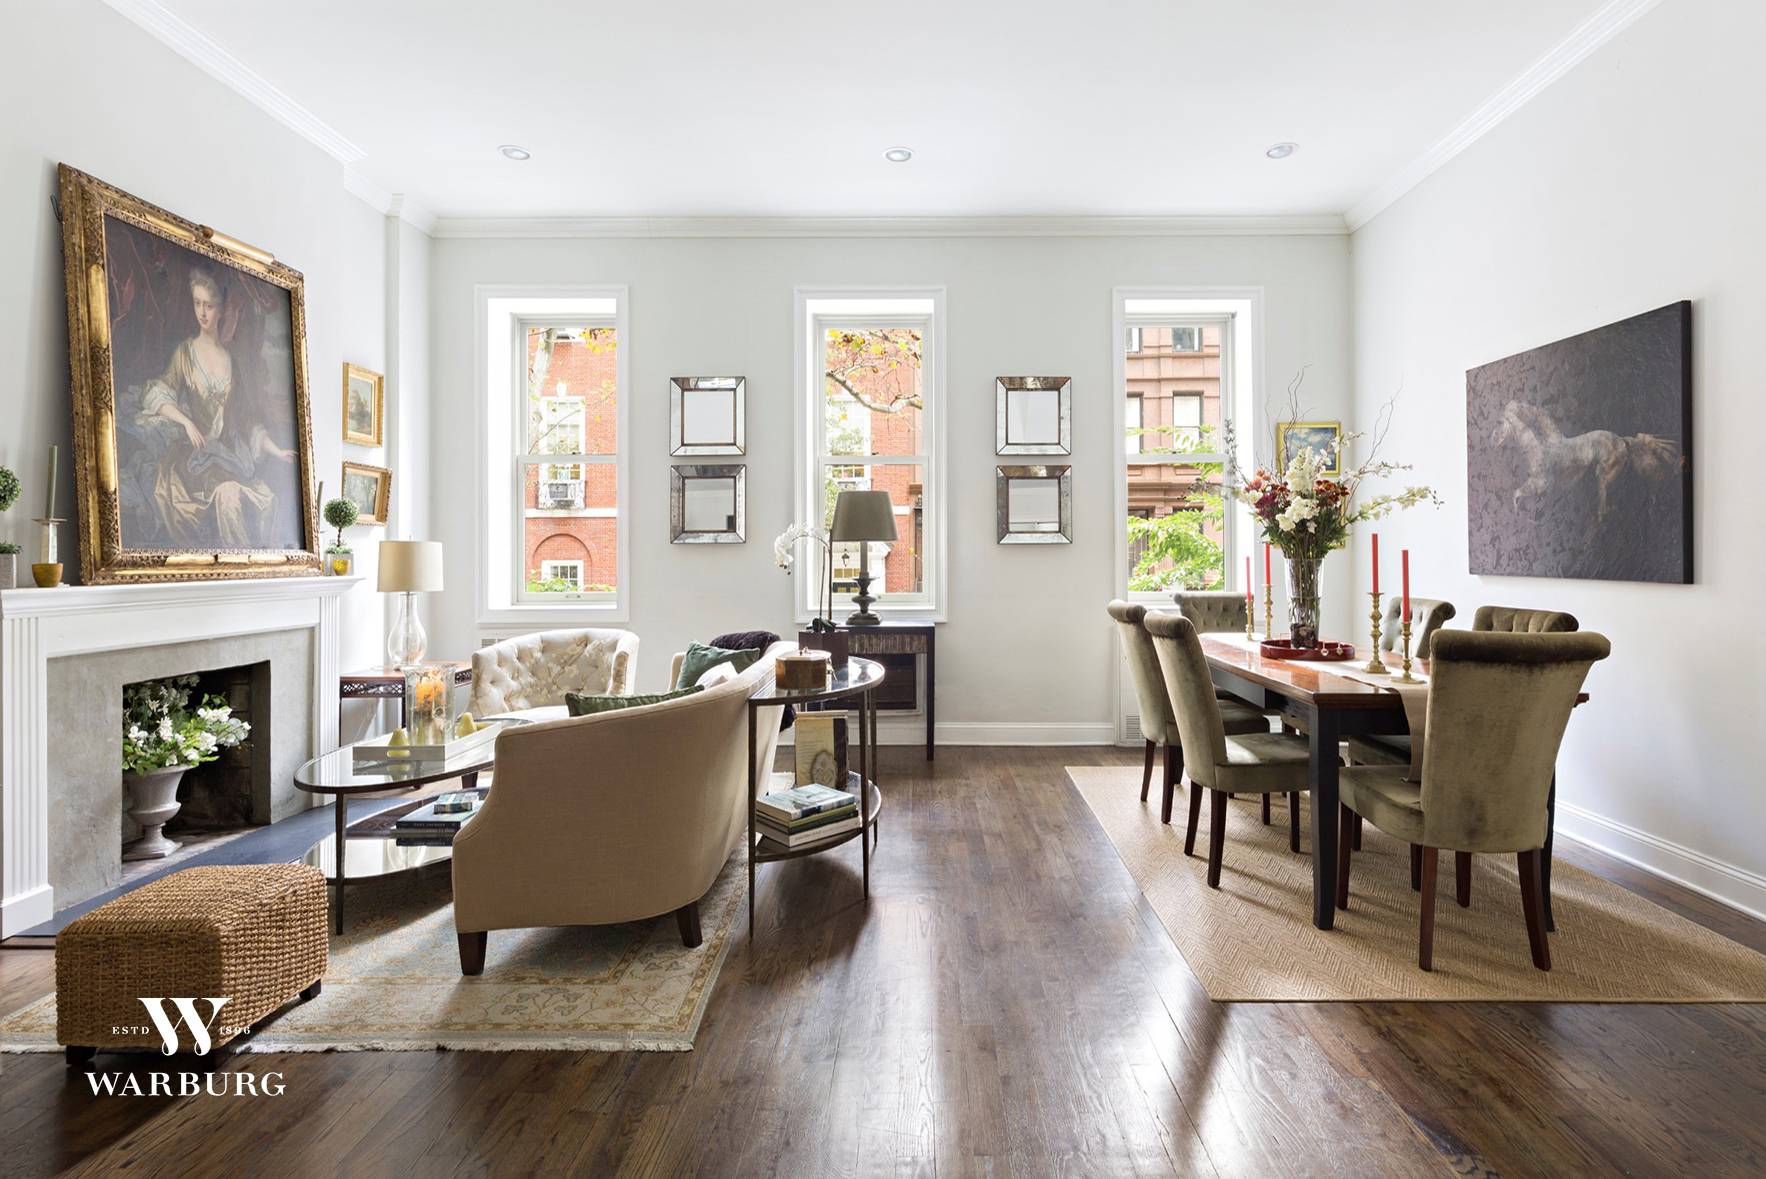 Enjoy living the townhouse life on one of Carnegie Hill's most beautiful tree lined streets, only steps to Central Park and perfectly located between Madison and Park Avenue.